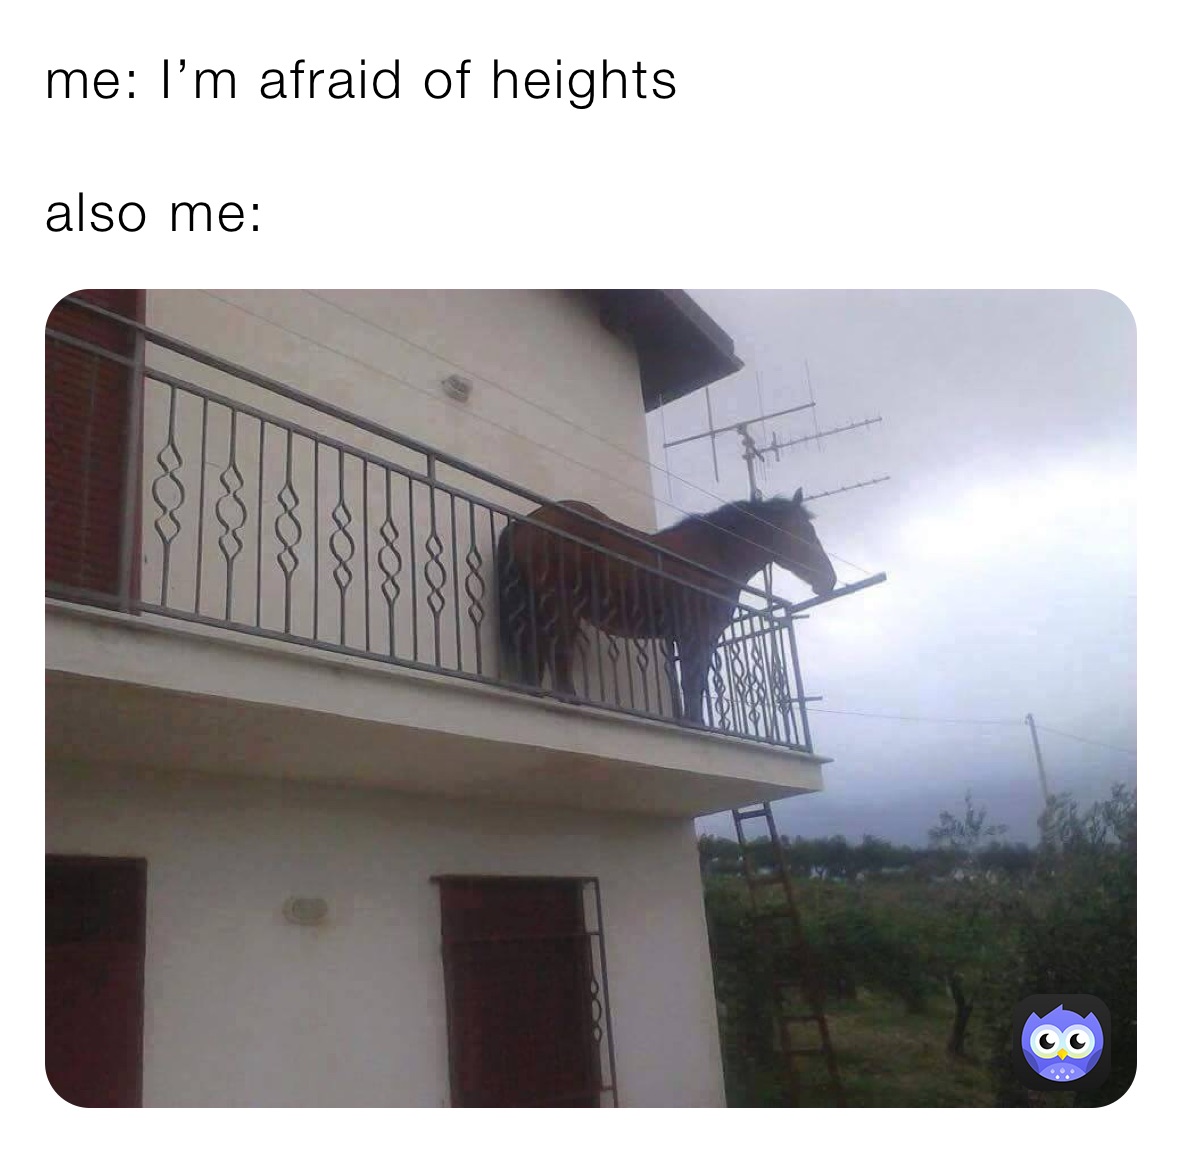 me: I’m afraid of heights 

also me: